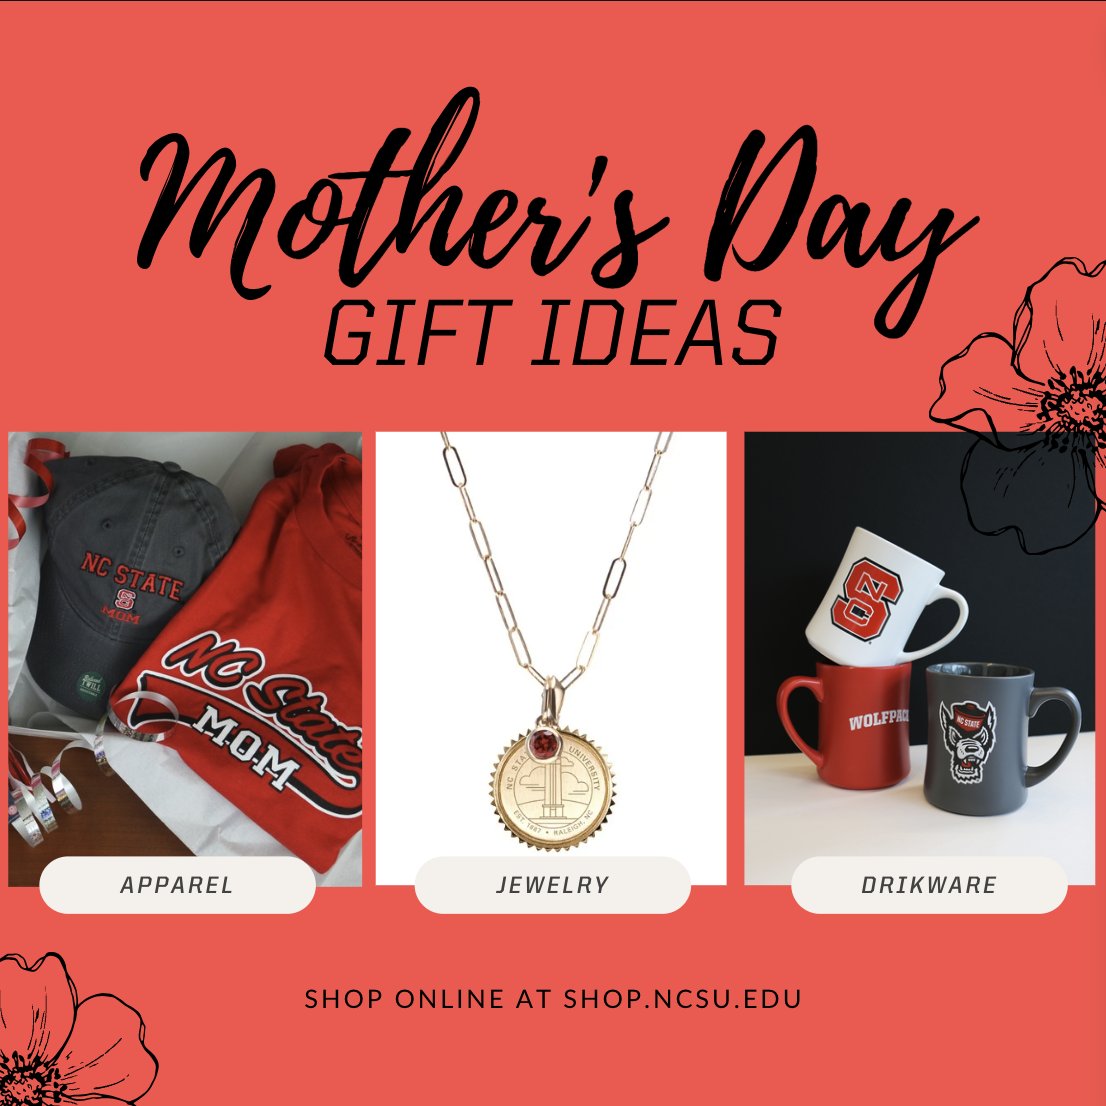 Looking for Mother's Day gift ideas? Give the gift of Wolfpack love with curated gifts from Wolfpack Outfitters. Shop online at shop.ncsu.edu